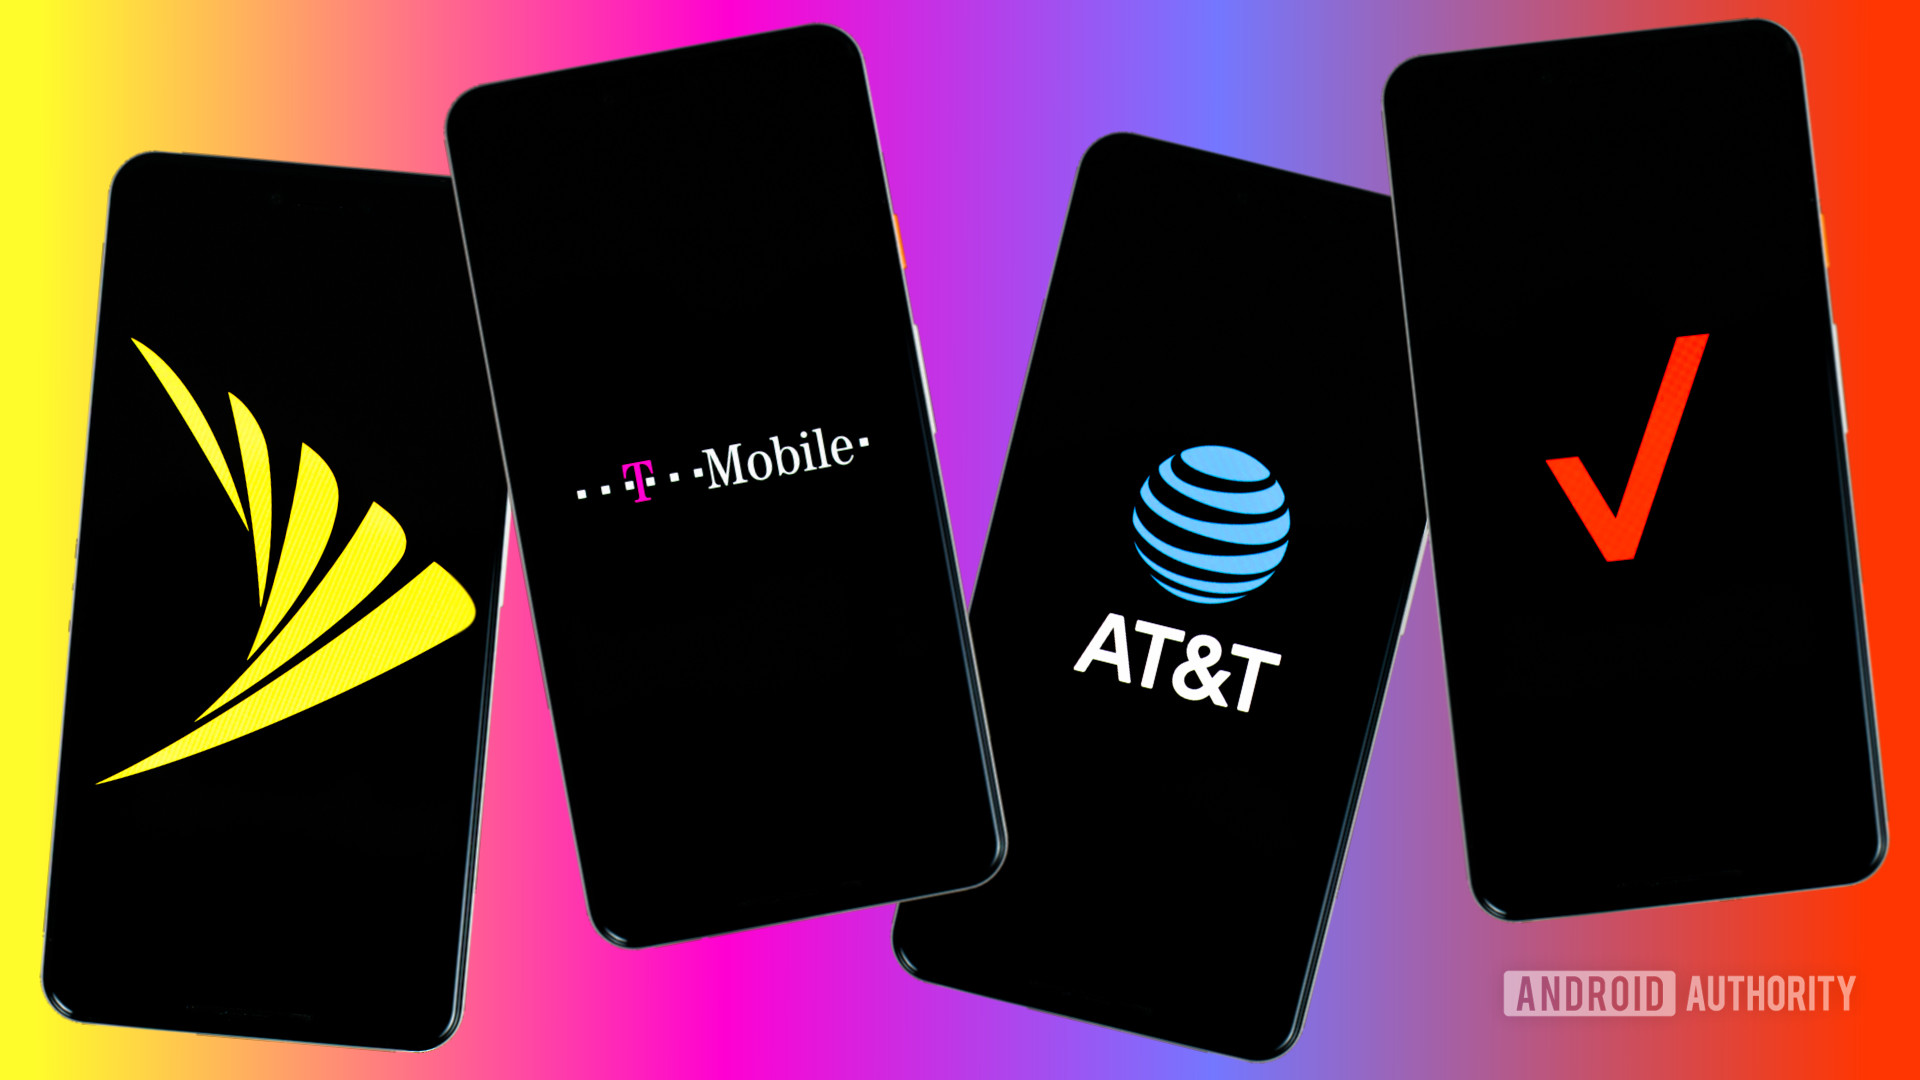 Sprint Verizon T Mobile and Verizon carrier logos on four smartphones side by side